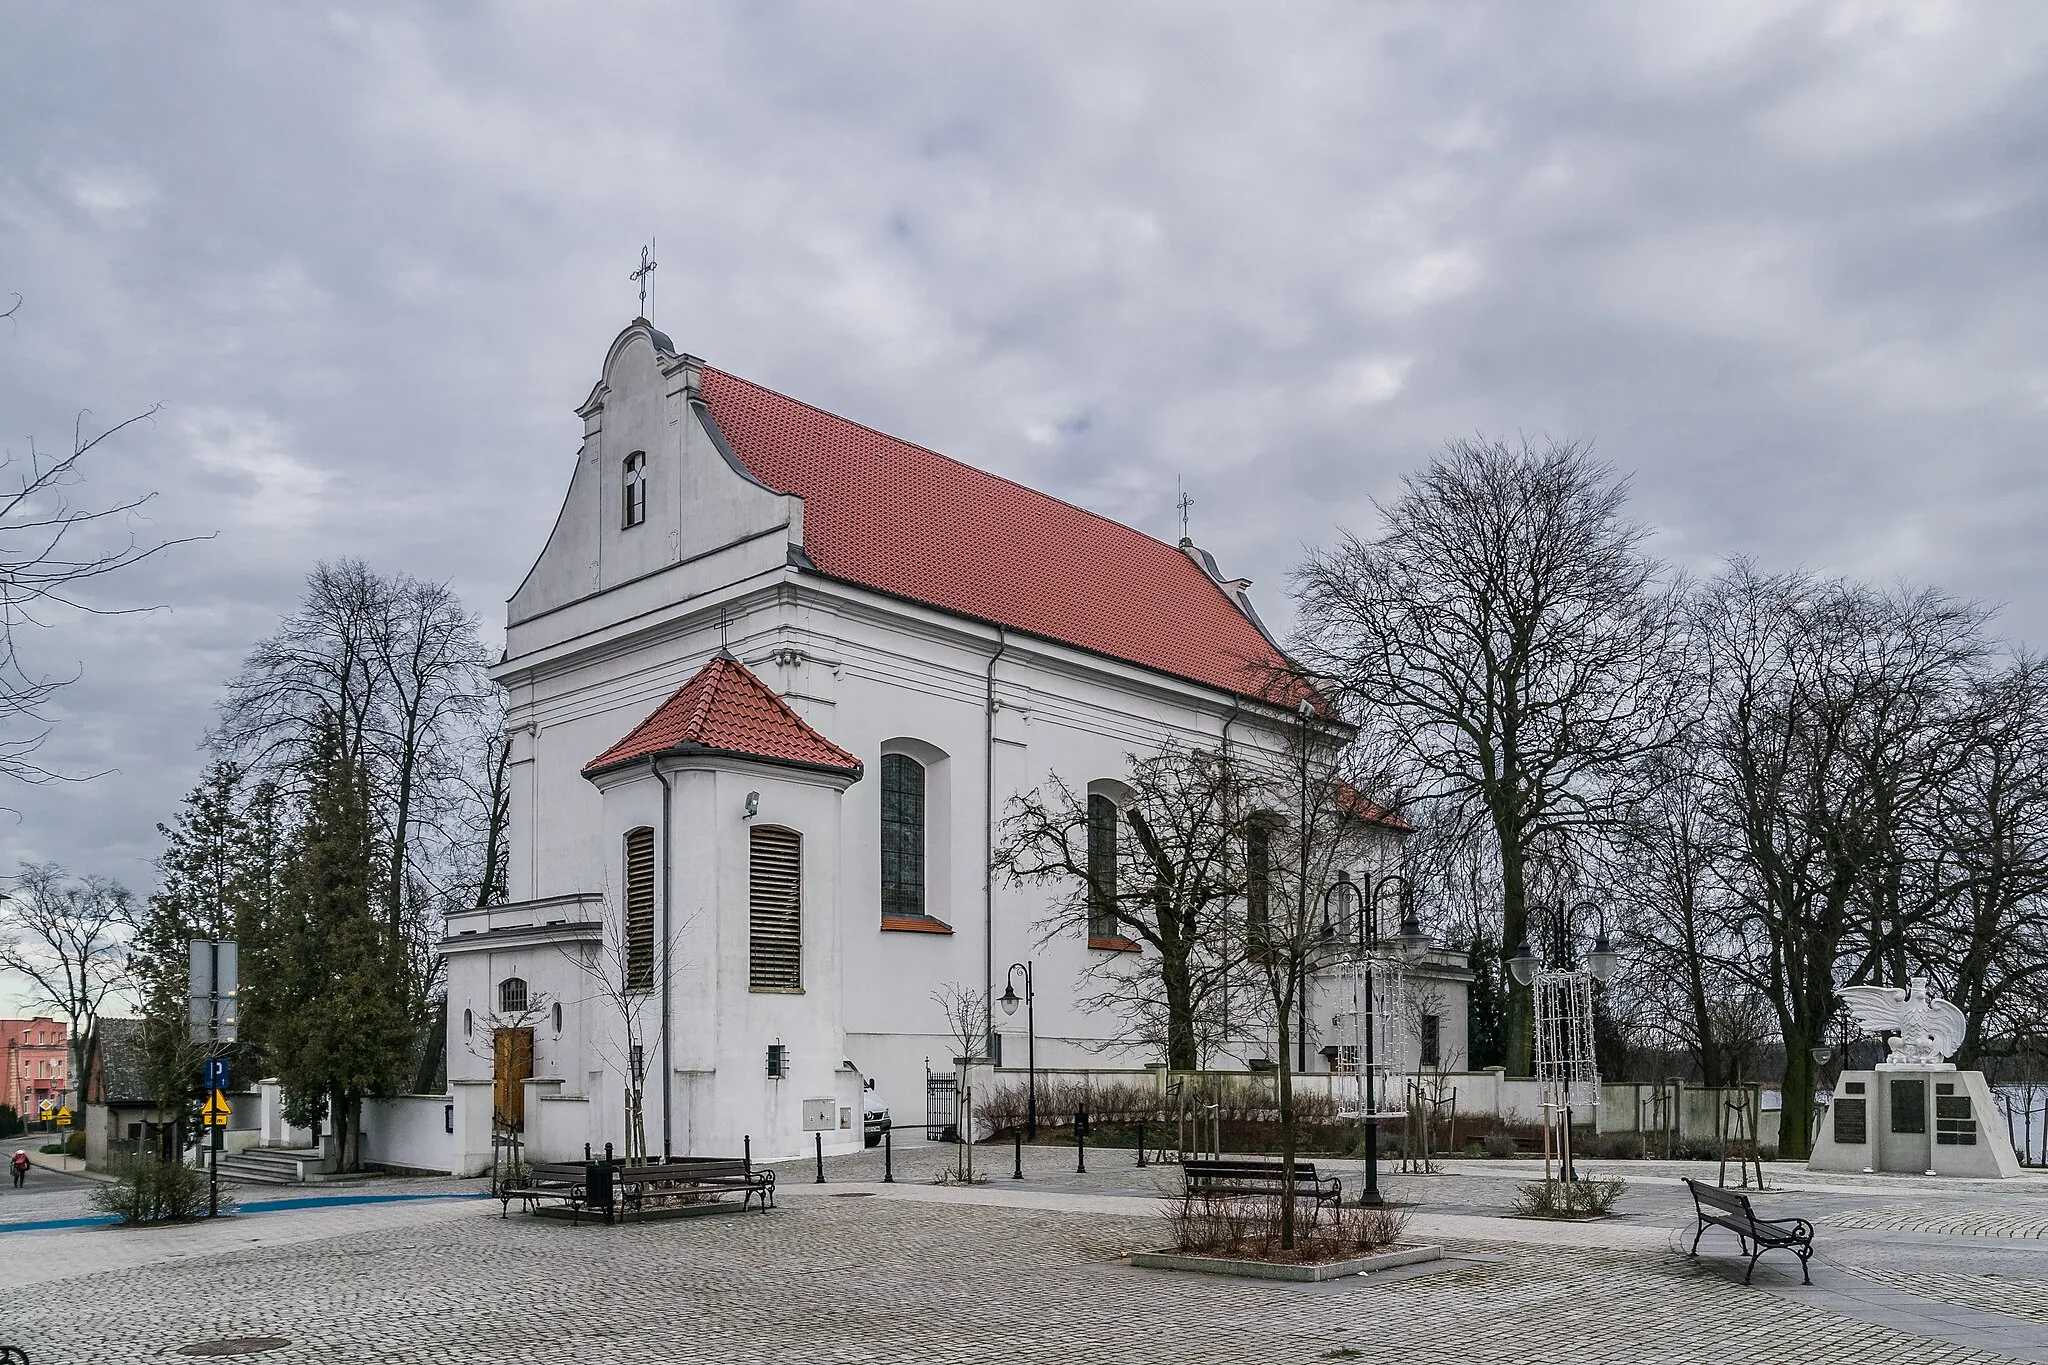 Photo showing: Saints Simon and Jude church in Więcbork, Kuyavian-Pomeranian Voivodeship, Poland

This is a photo of an object of cultural heritage inscribed in the registry of the Kuyavian-Pomeranian Voivodeship with number A/314.